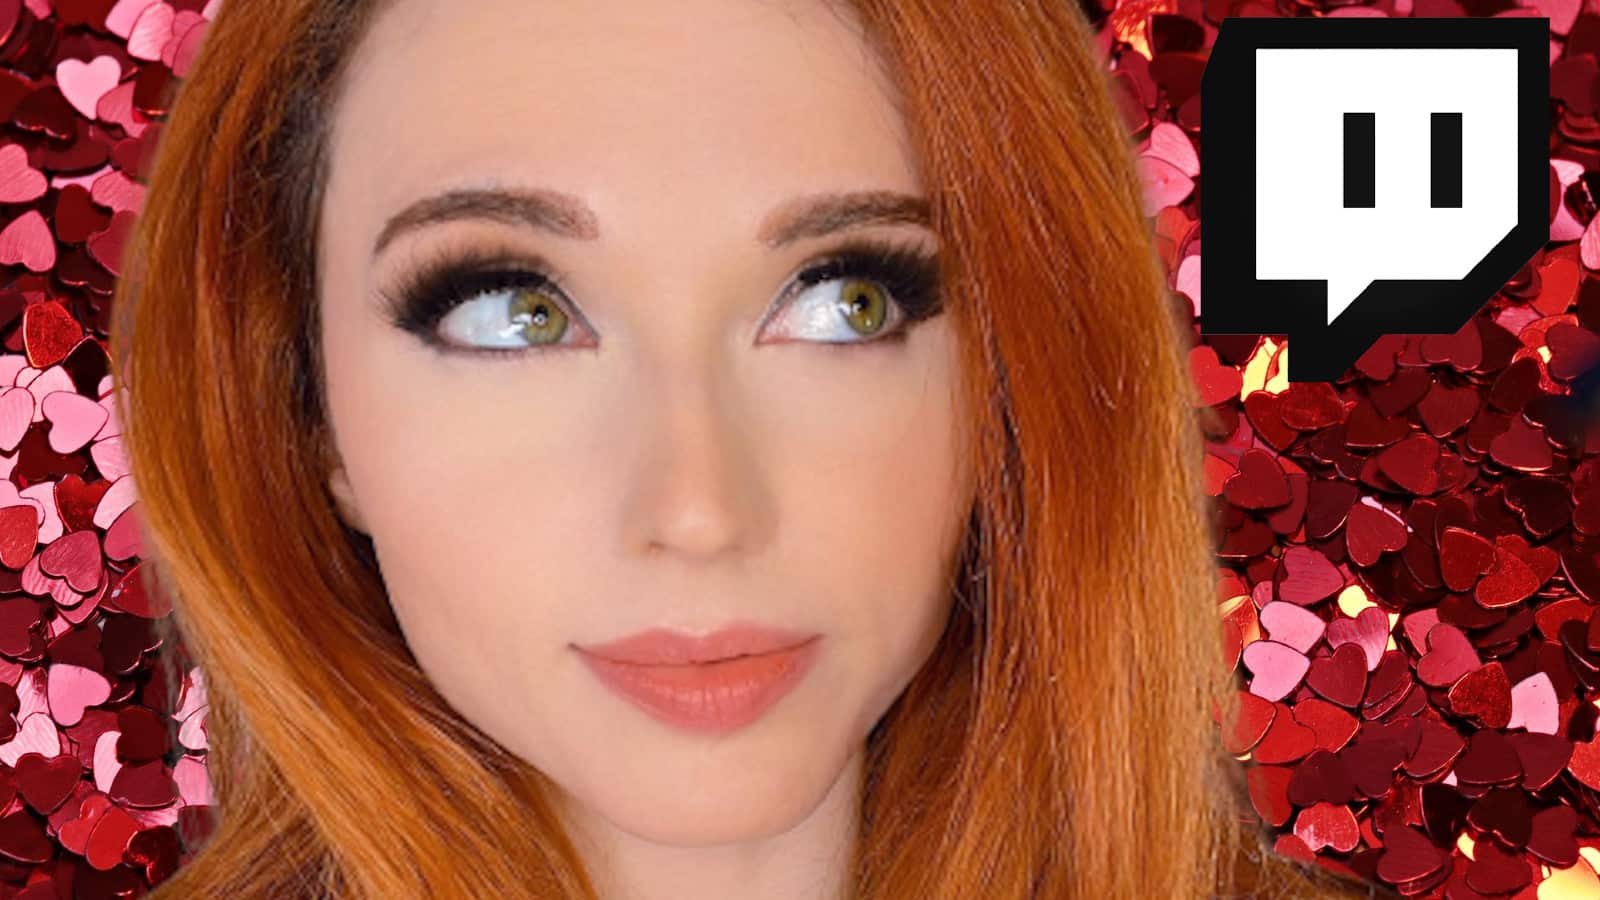 Twitch streamer explains why getting a boyfriend would make her